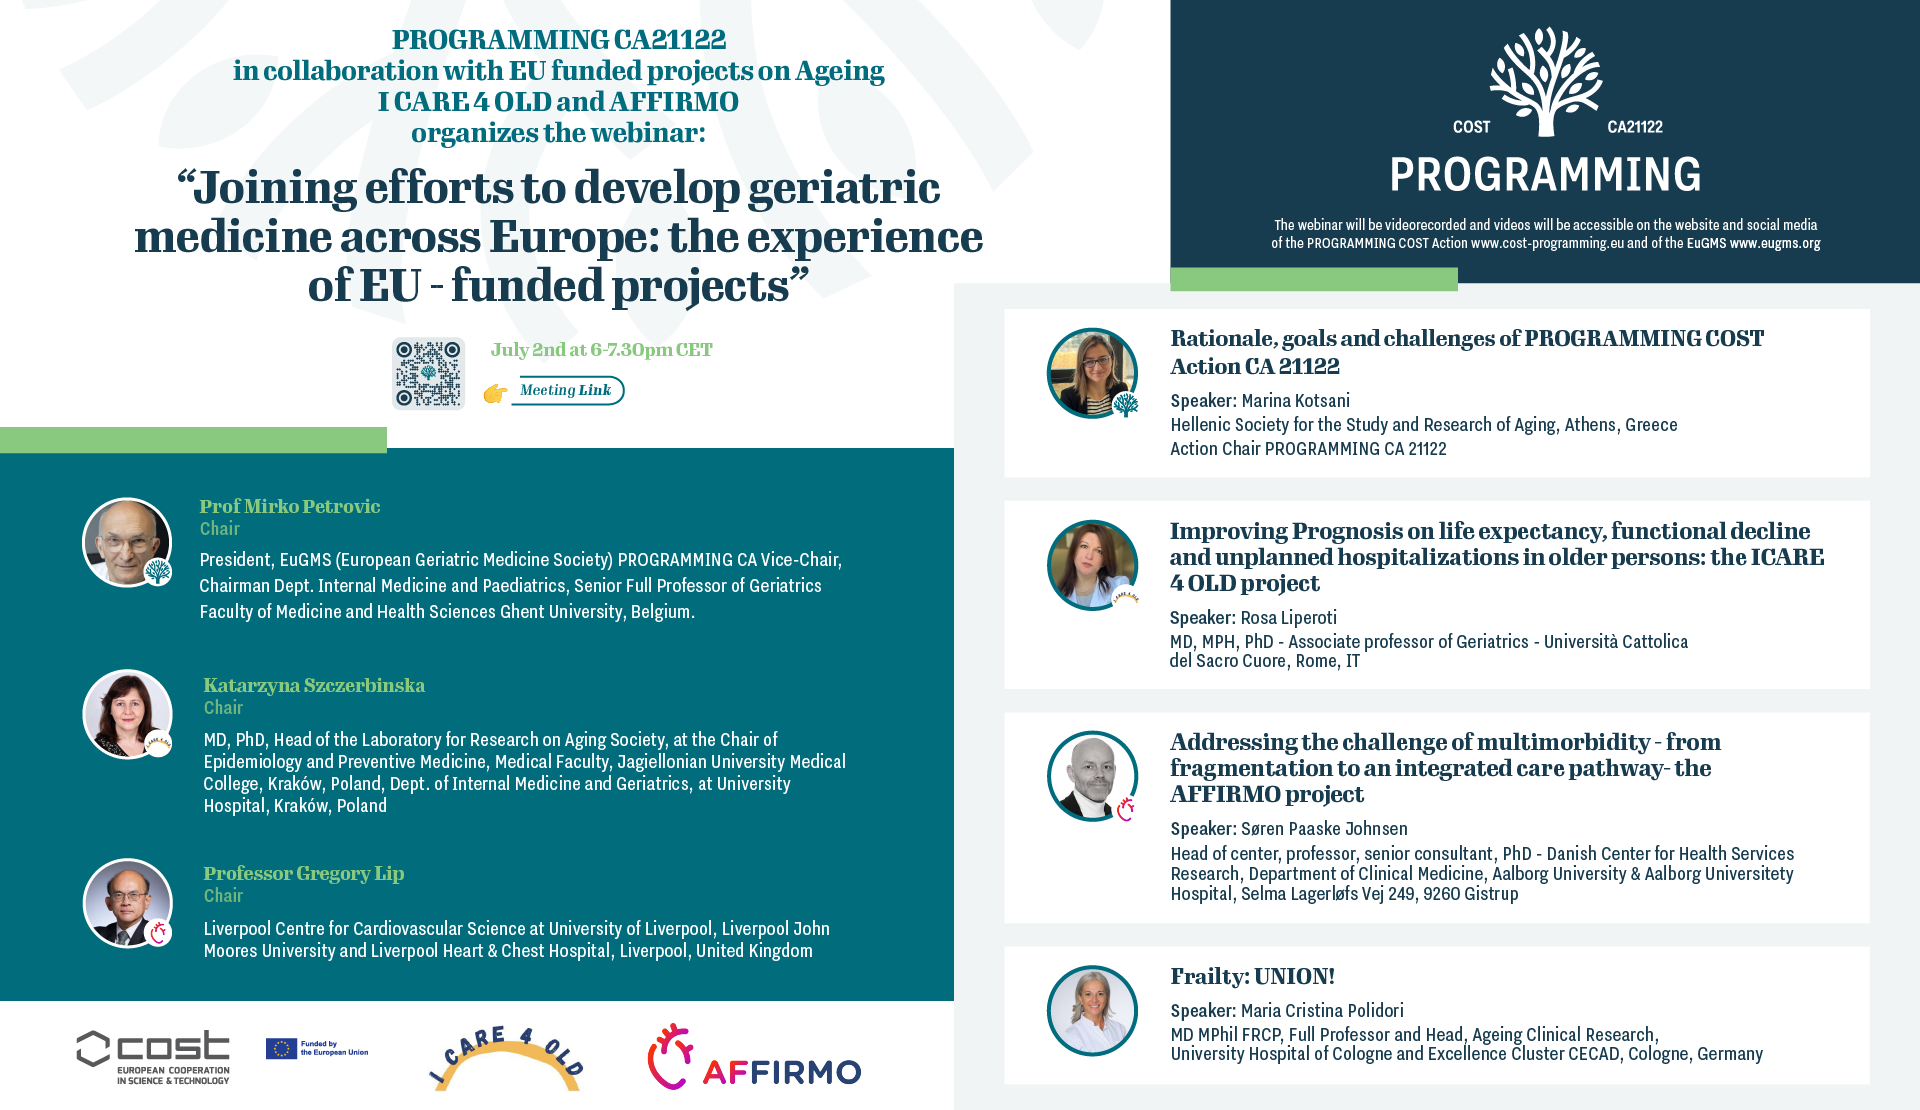 2nd July Webinar: “Joining efforts to develop geriatric medicine across Europe: the experience of EU – funded projects”